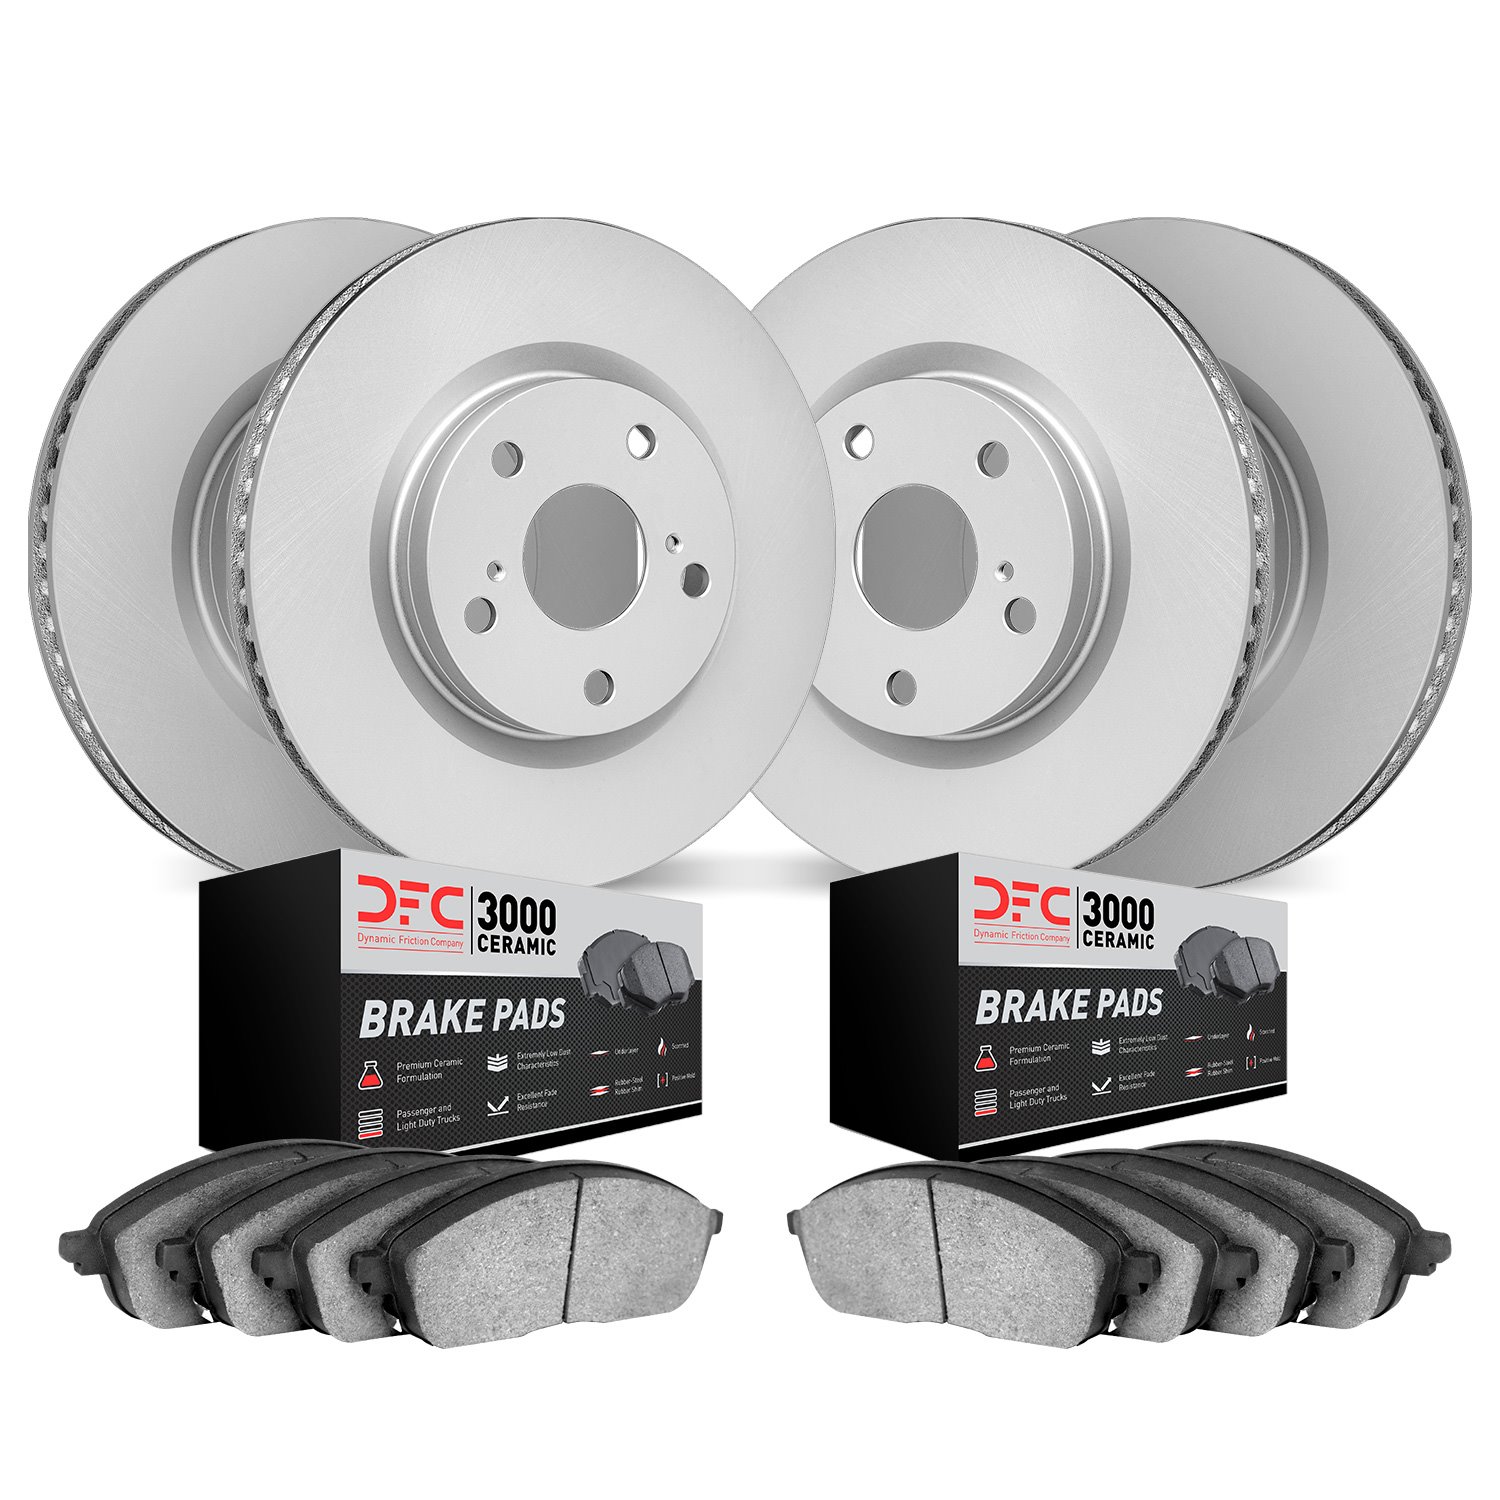 4304-31076 Geospec Brake Rotors with 3000-Series Ceramic Brake Pads Kit, Fits Select BMW, Position: Front and Rear